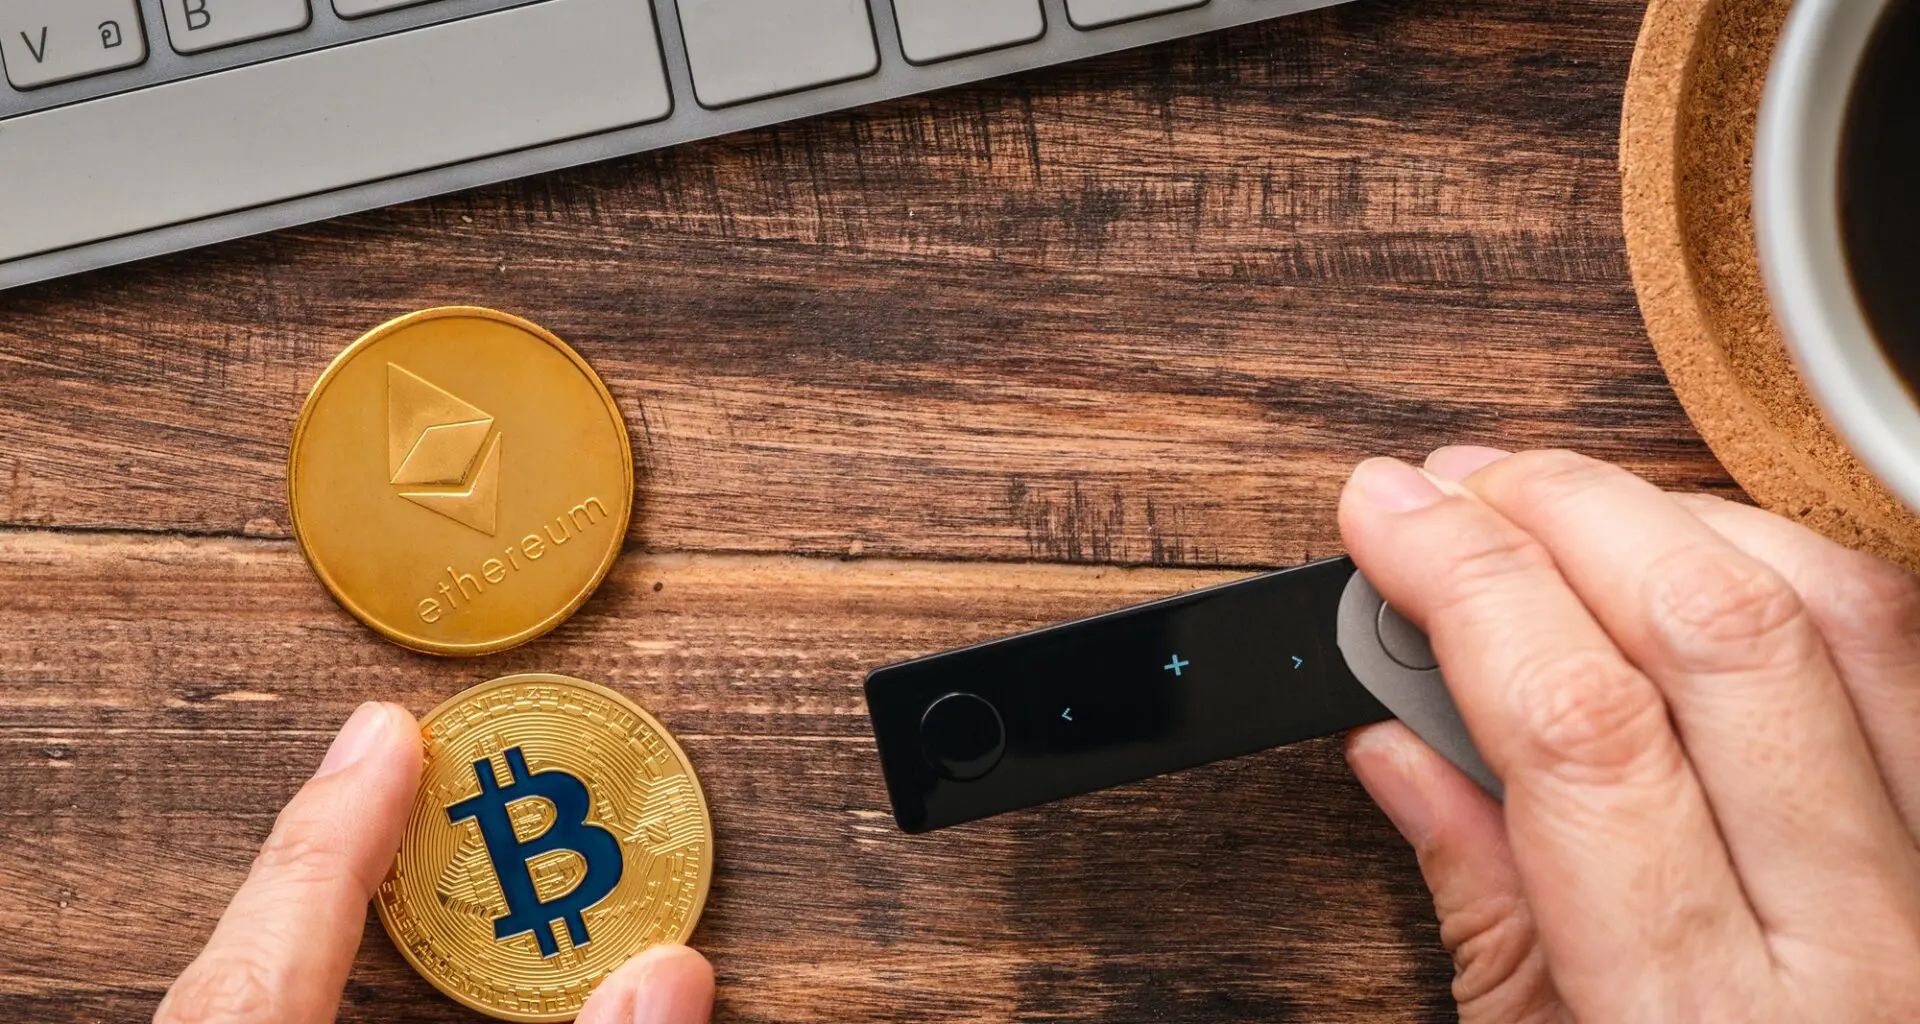 A person's hand holding a hardware wallet next to a Bitcoin and an Ethereum coin on a wooden desk, with a keyboard and a cup of coffee nearby.